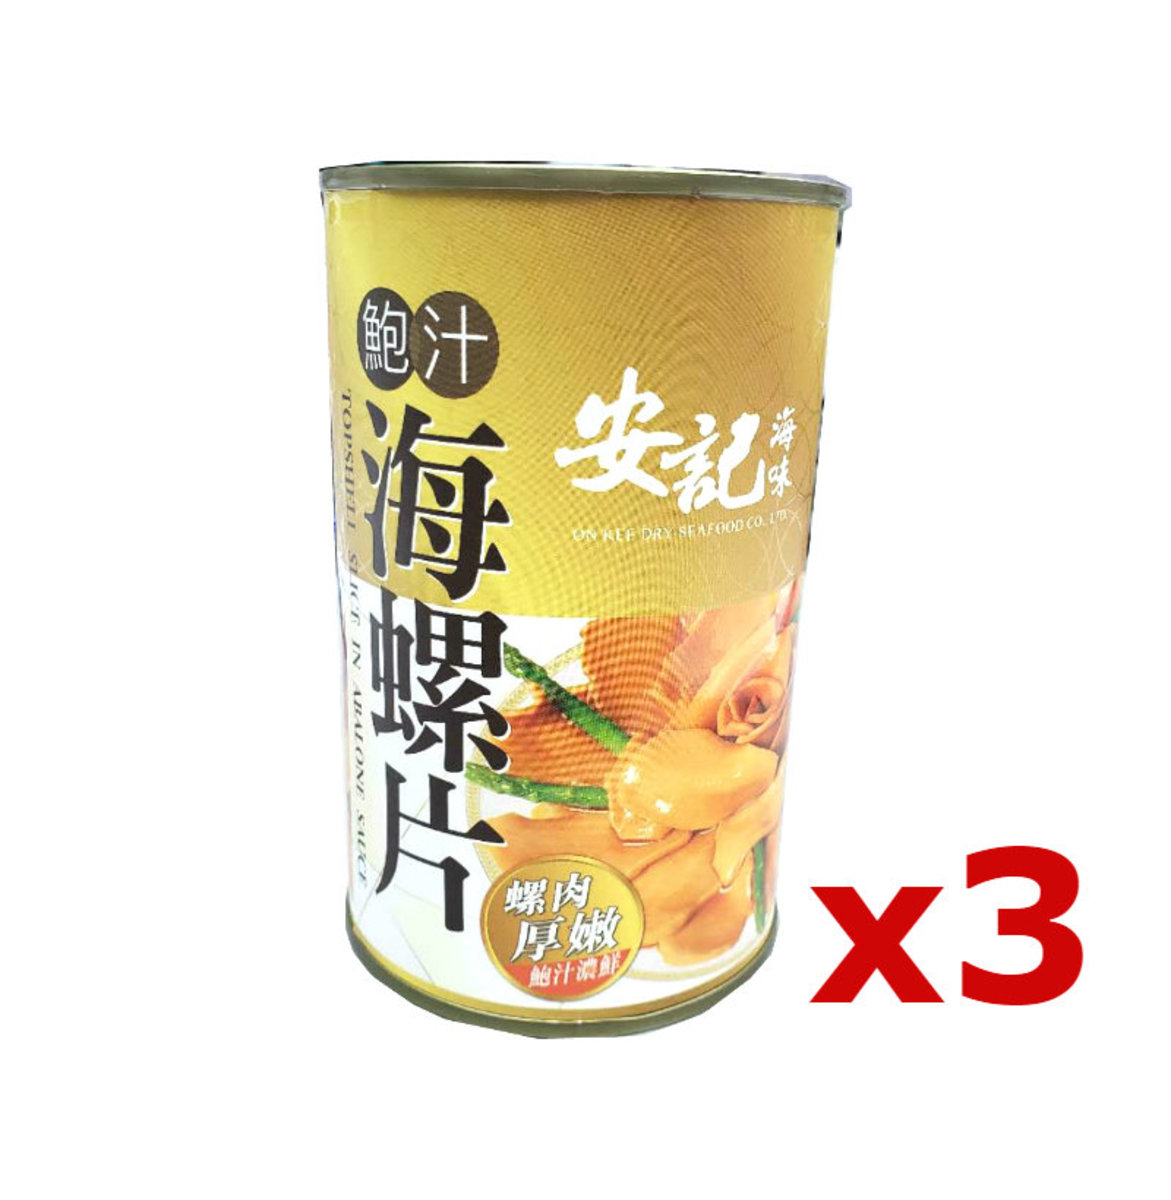 Sliced Conch Meat in Abalone Sauce (Promotion offer 3 cans set) - Random New/Old Design